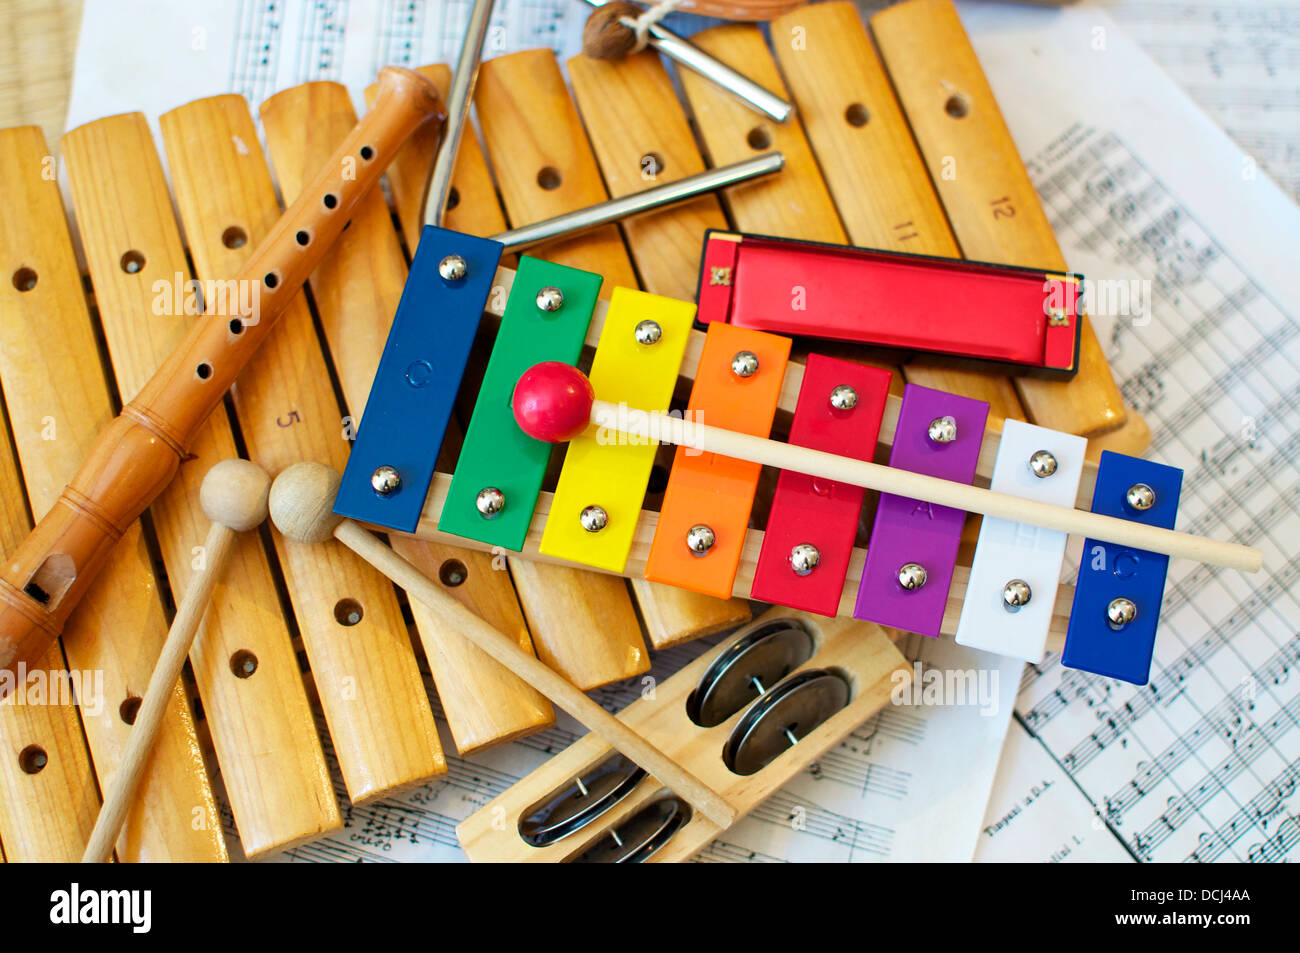 Musical instruments for Children Stock Photo